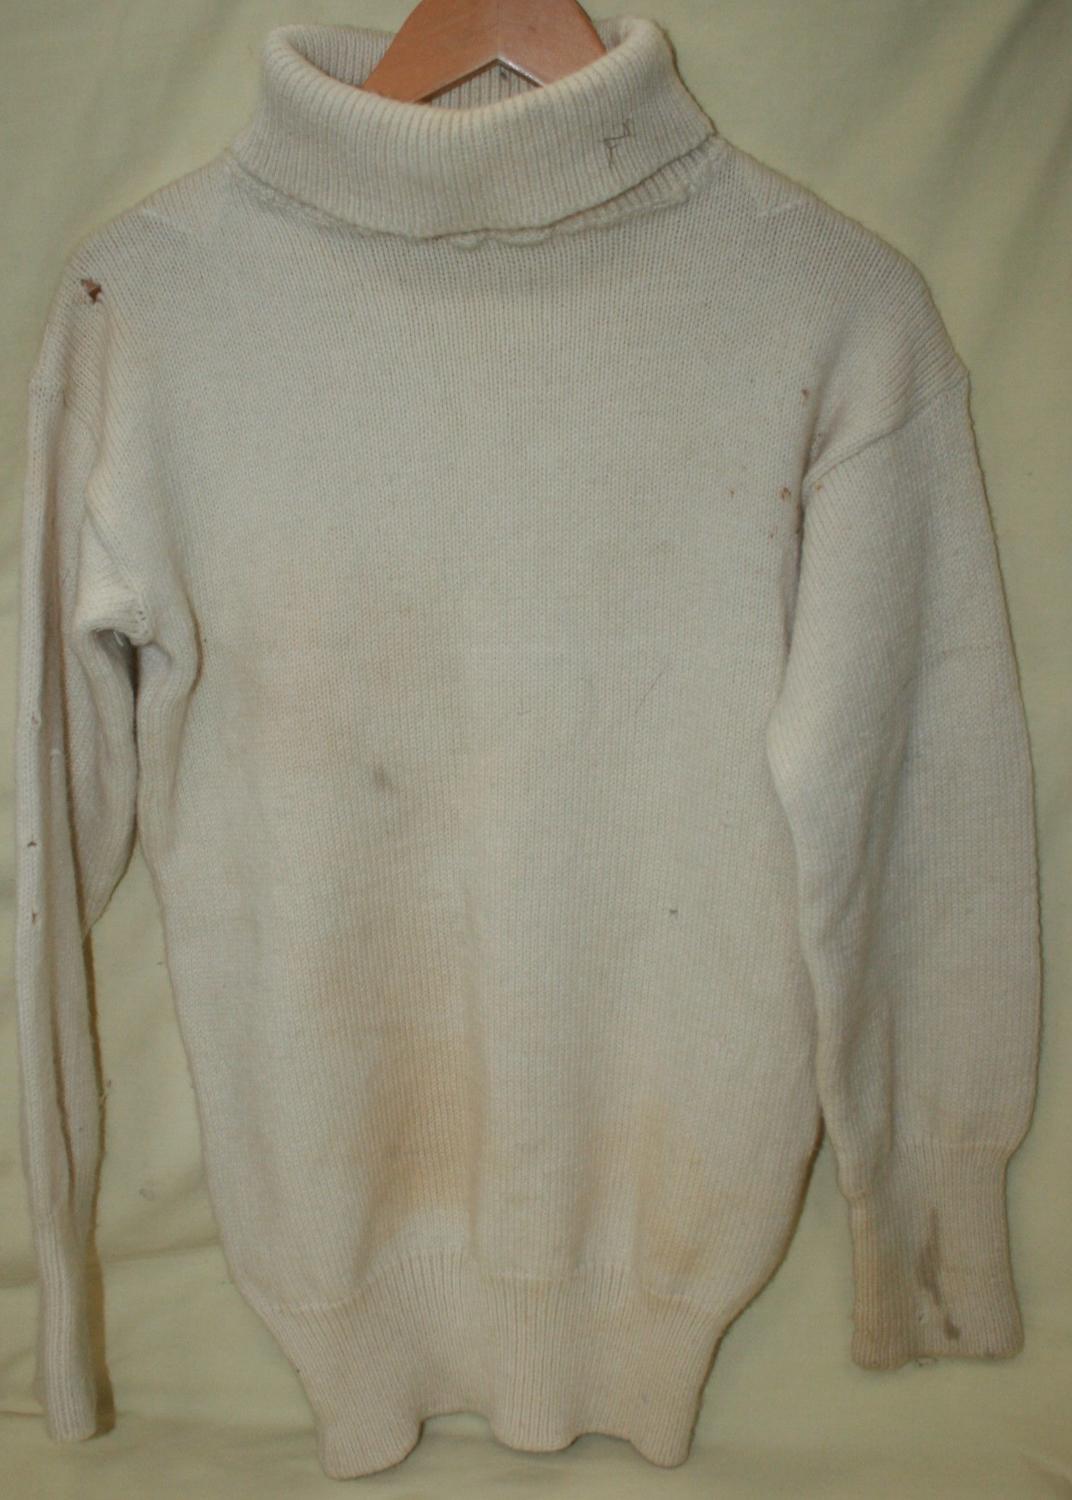 POST WWII ROLL NECK WHITE JUMPER ( GOOD WWII DISPLAY / WEARING ITEM )